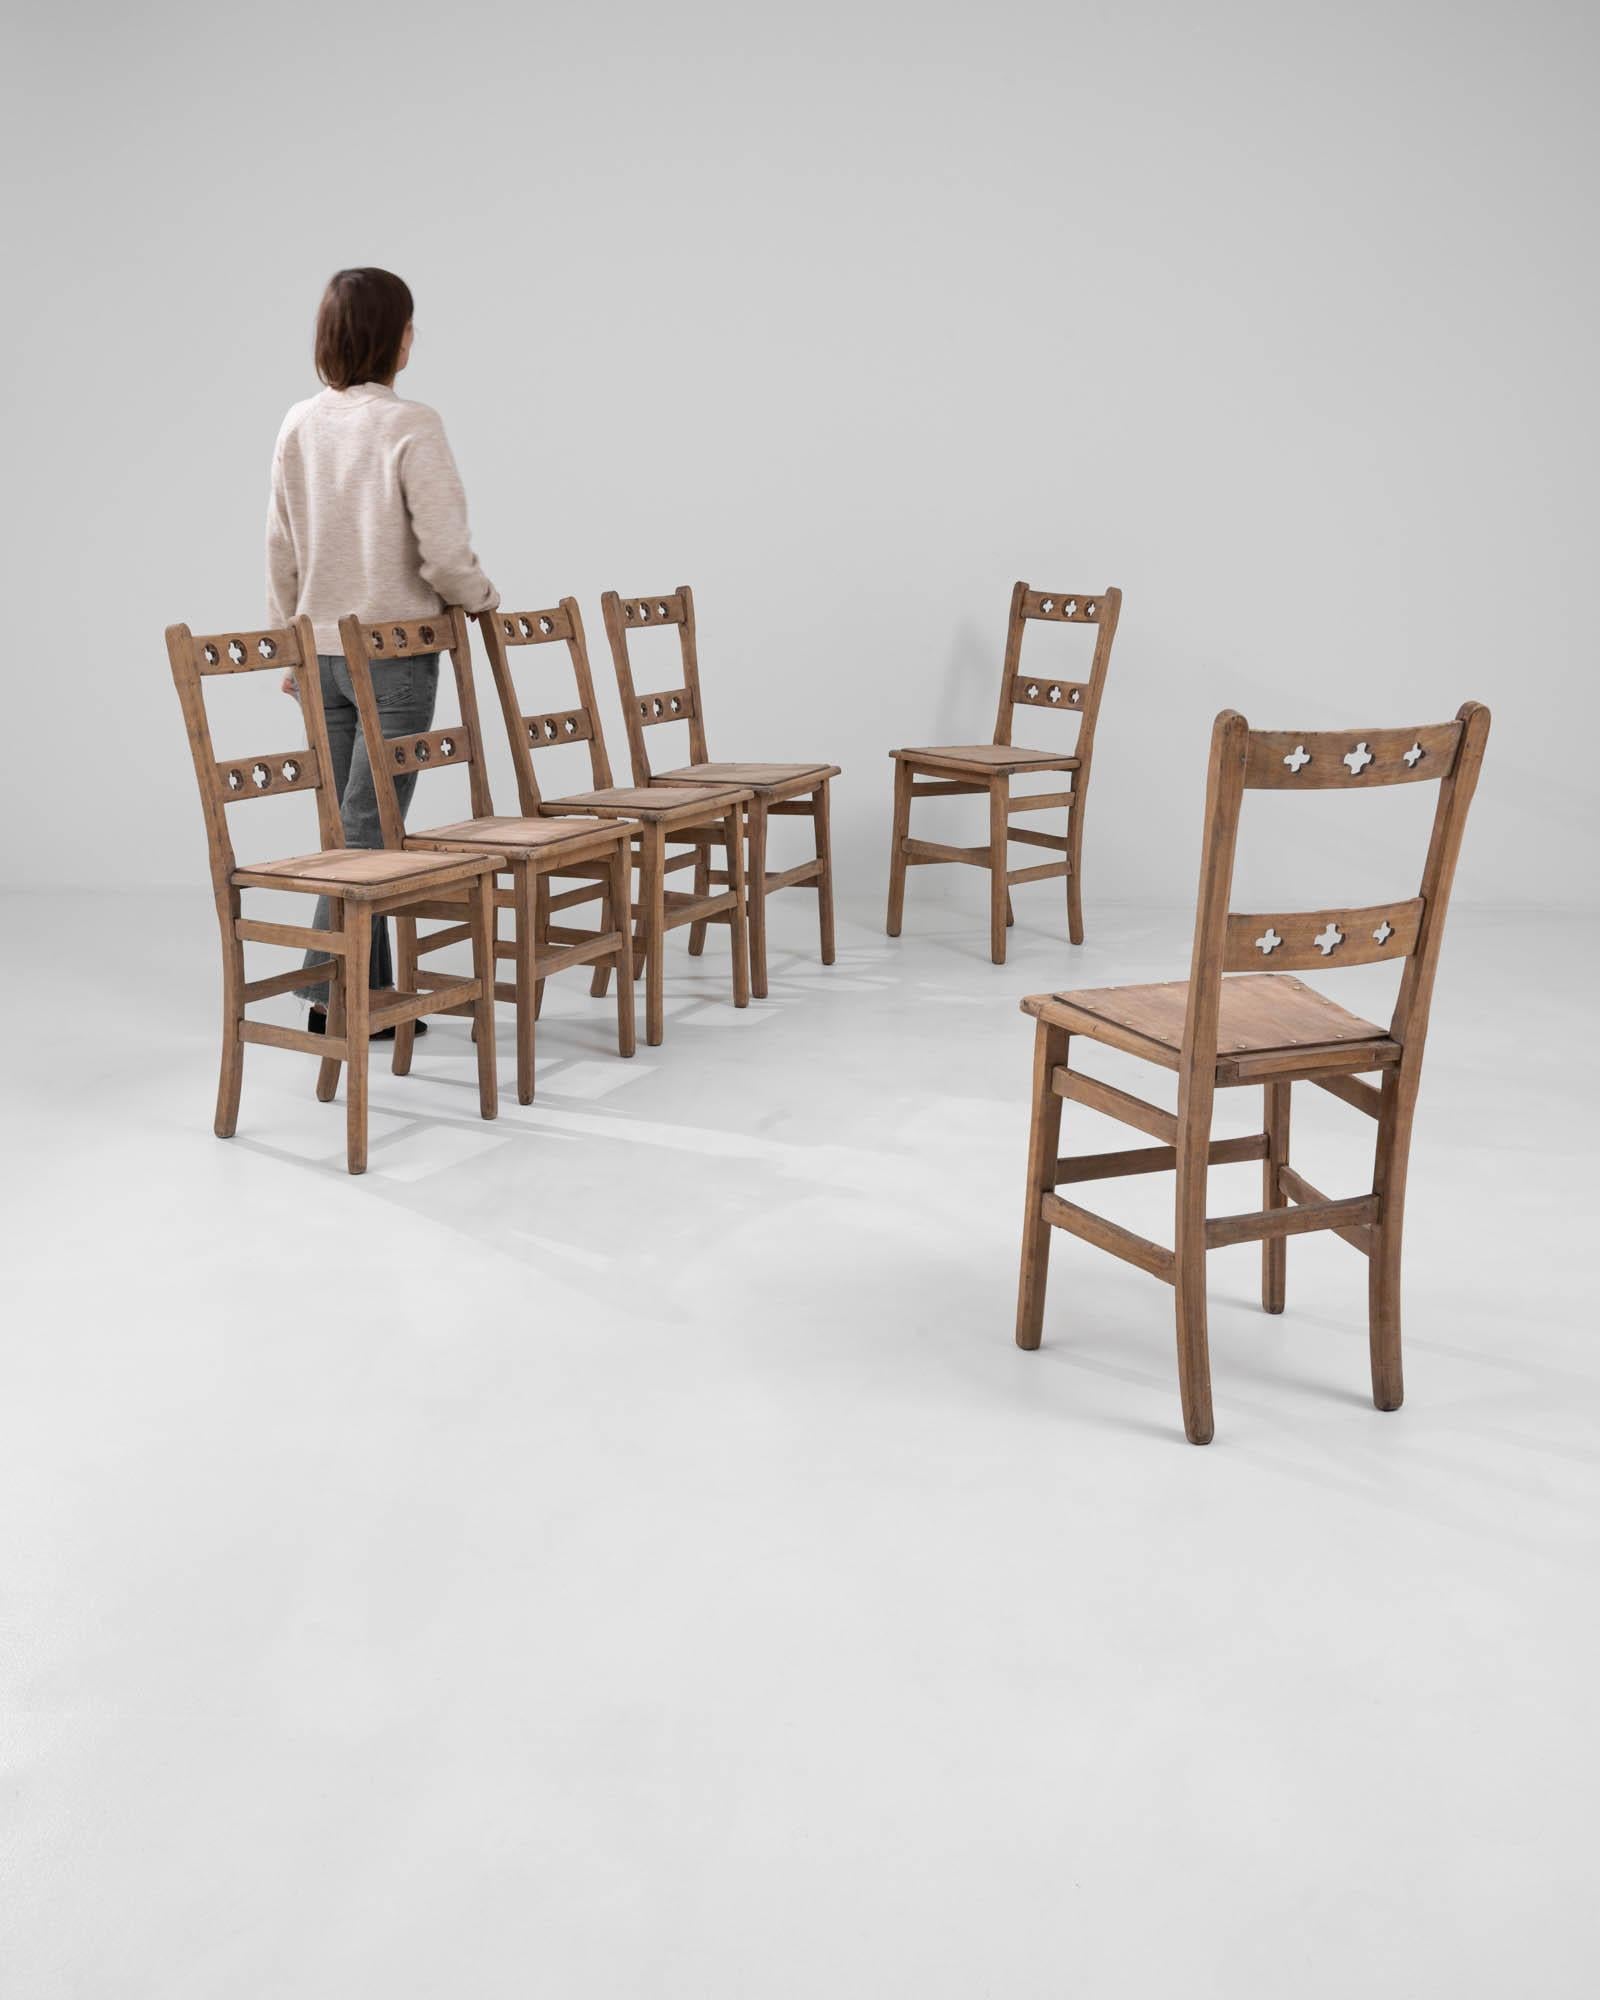 This exquisite set of six 1910s French dining chairs brings a slice of history into your dining space. Crafted from rich, sturdy wood, each chair features a distinctive backrest with charming cut-out details, adding a dash of elegance and character.